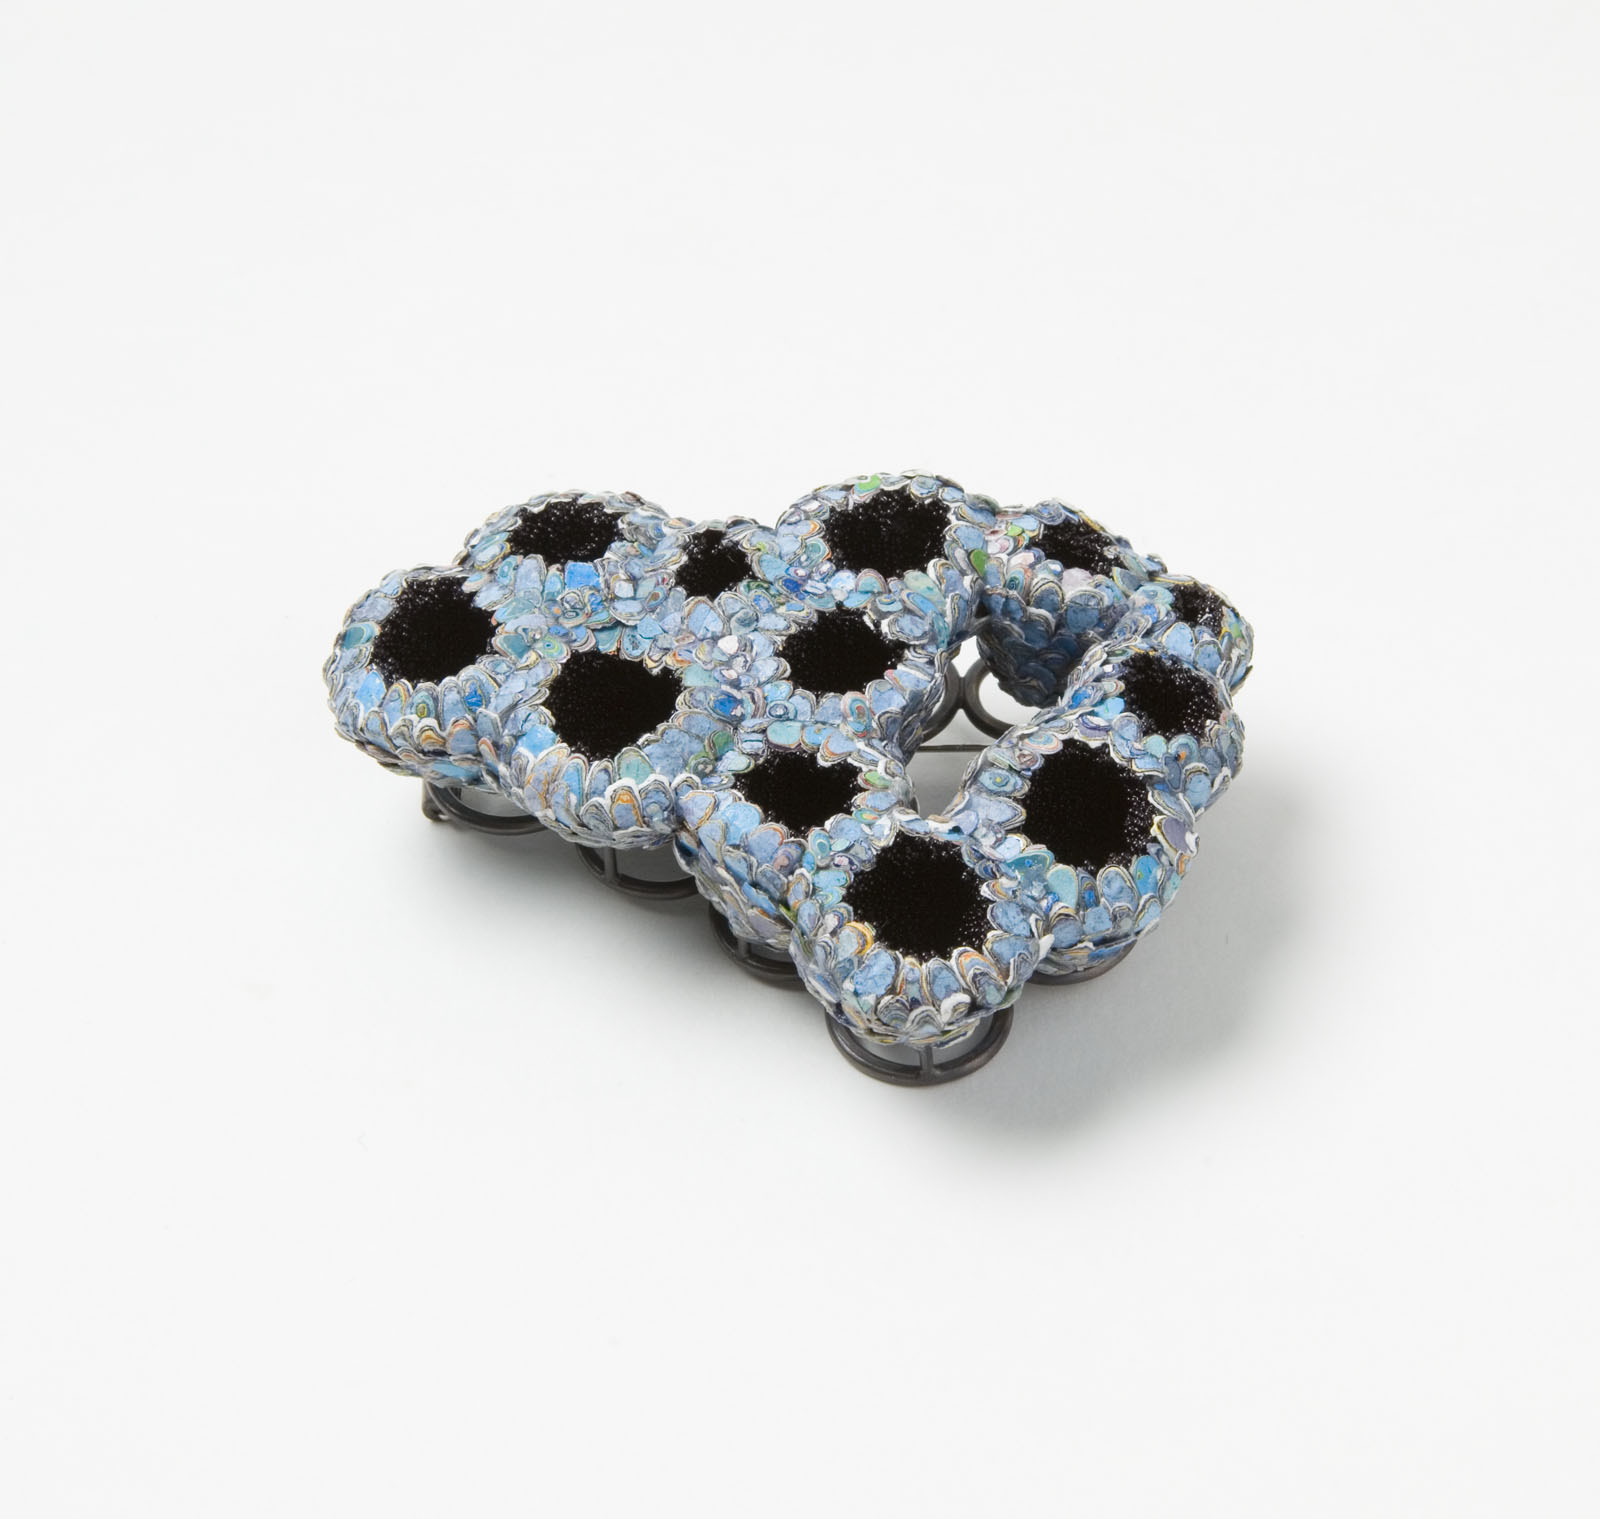 "The Secret Keepers (Blue 1)" I Brooch, 2016 I Seed pods, graffiti, glass, silver, stainless steel I Photo: Mirei Takeuchi